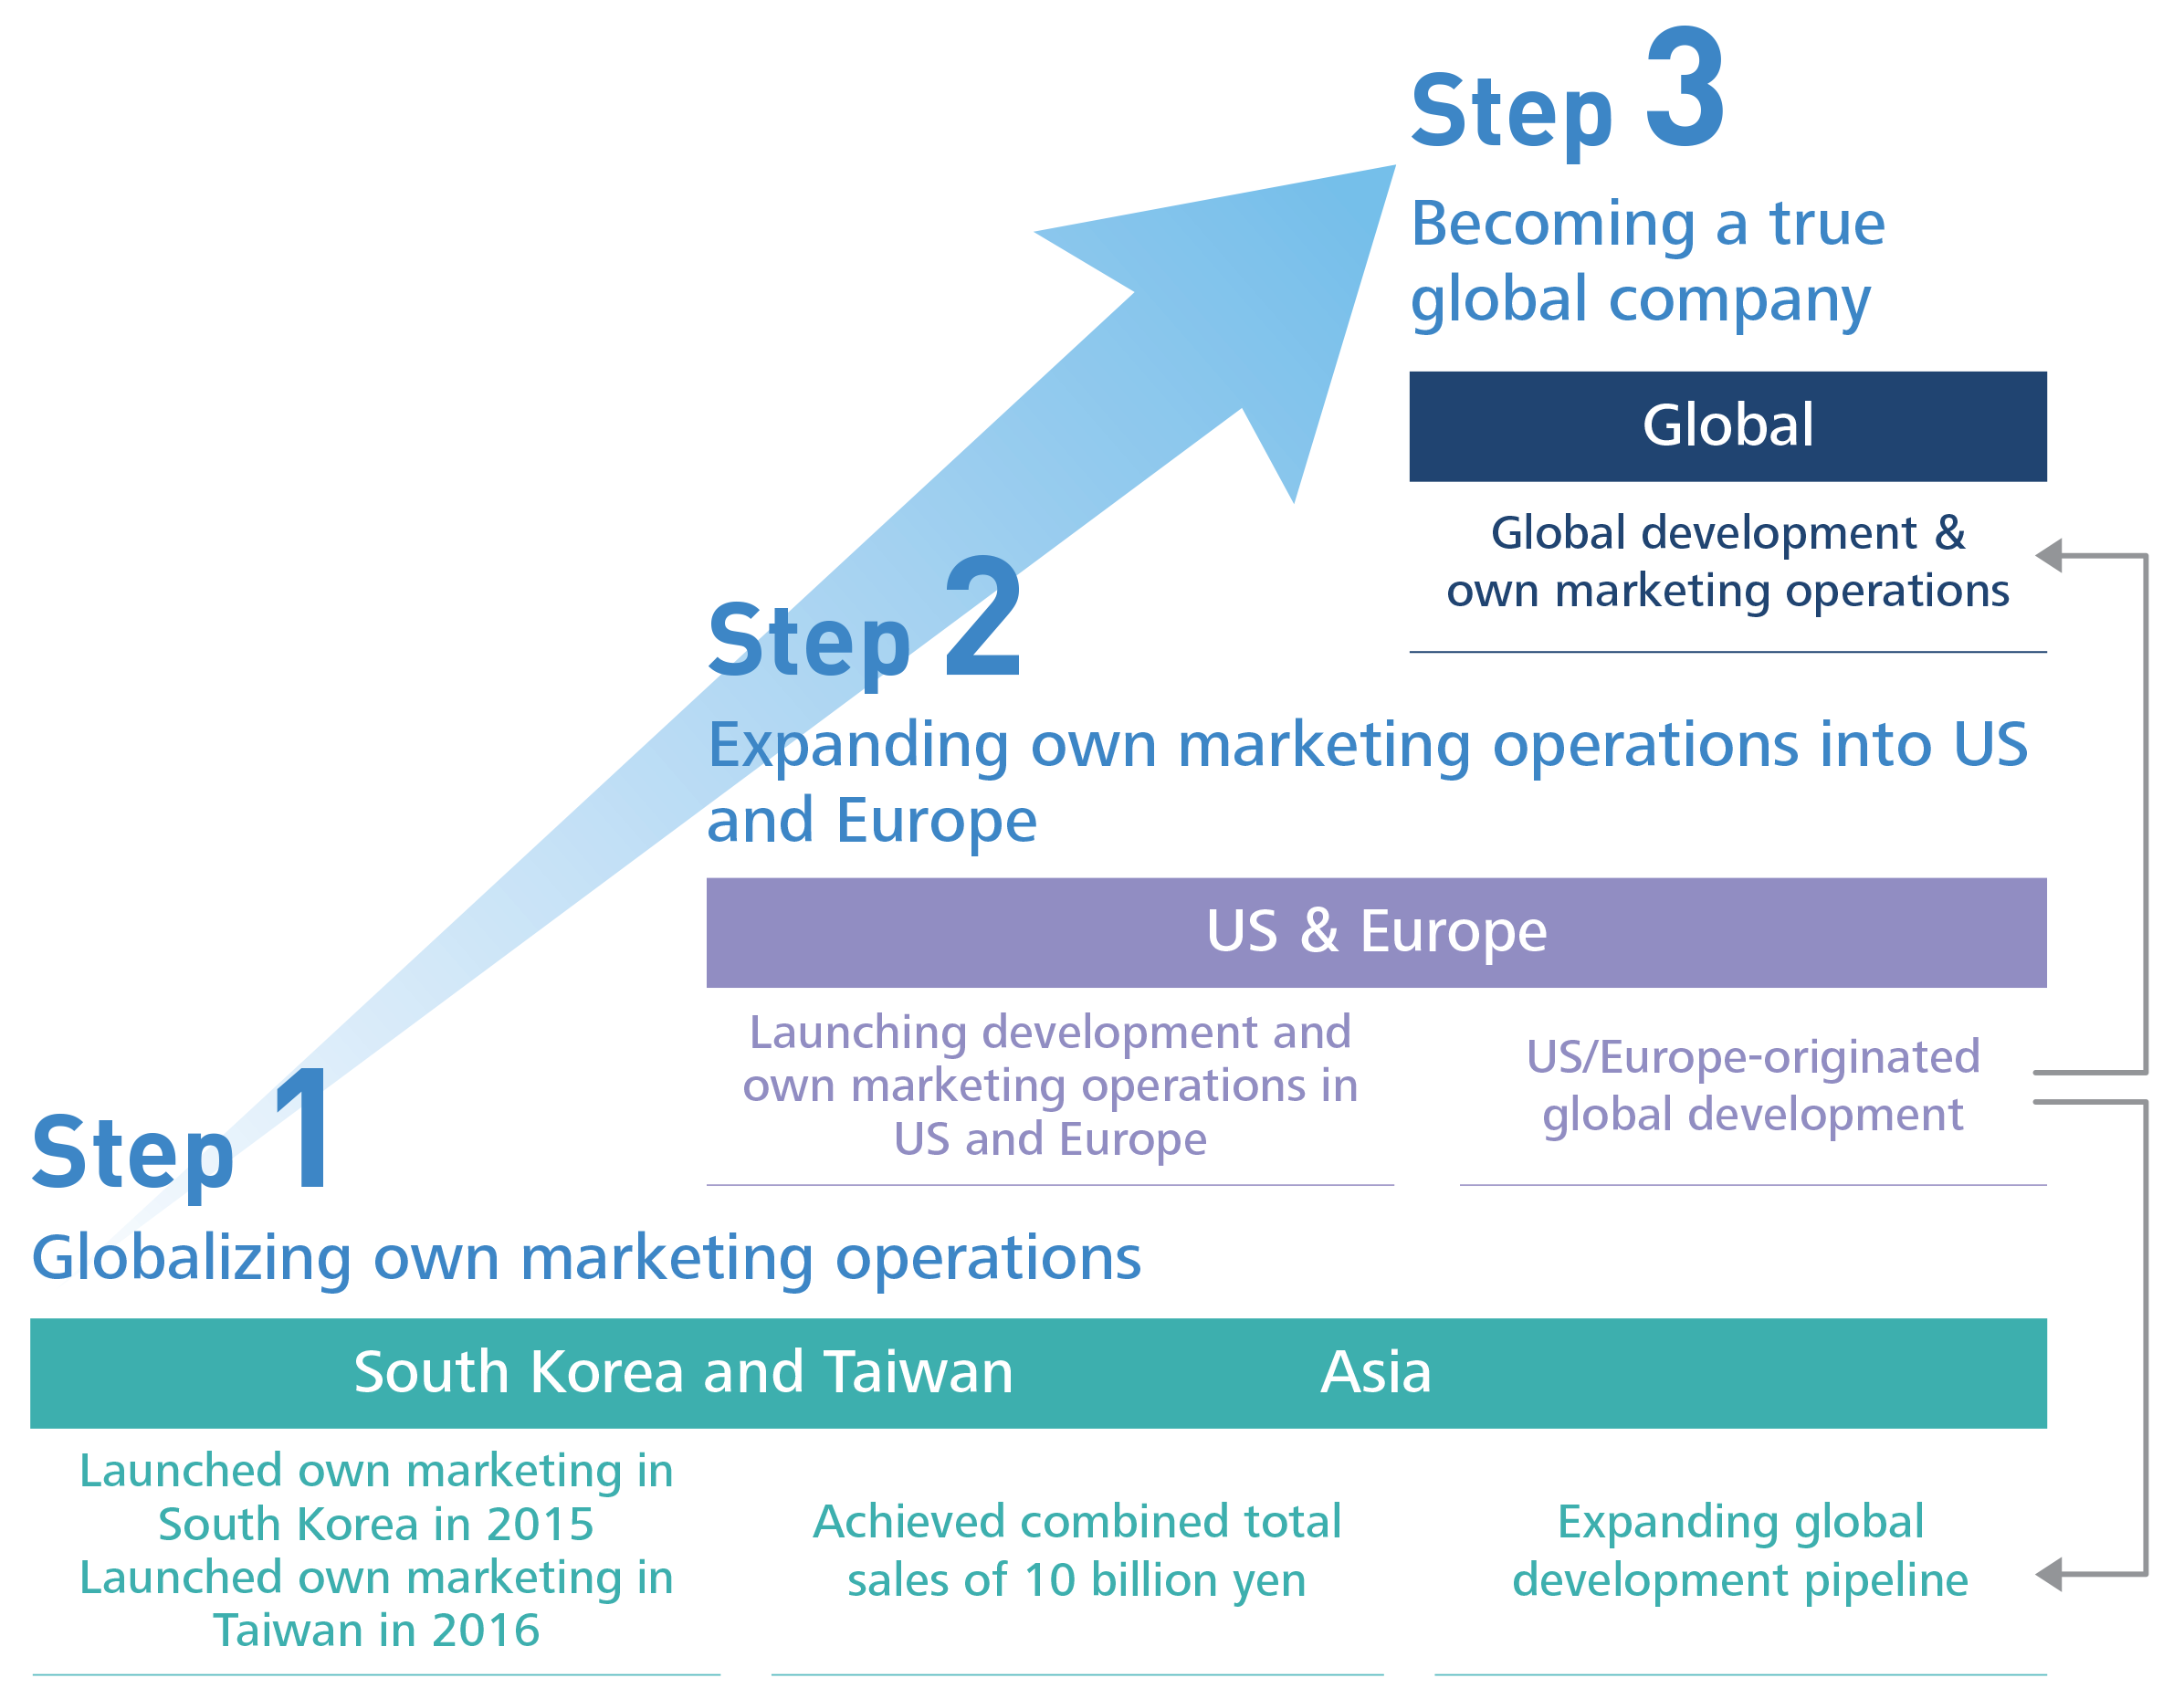 Step1 Globalizing own marketing operations→・Launching own marketing in South Korea and TaiwanBuilding business base in AsiaStrengthening new drug development framework in US and Europe Step2 Expanding own marketing operations into US and Europe→・Expanding sales in AsiaLaunching own marketing in US and European markets Step3 Becoming a true globalcompany→・Expanding global development pipeline・Delivering US/Europe-originated pharmaceutical products to patients around the world